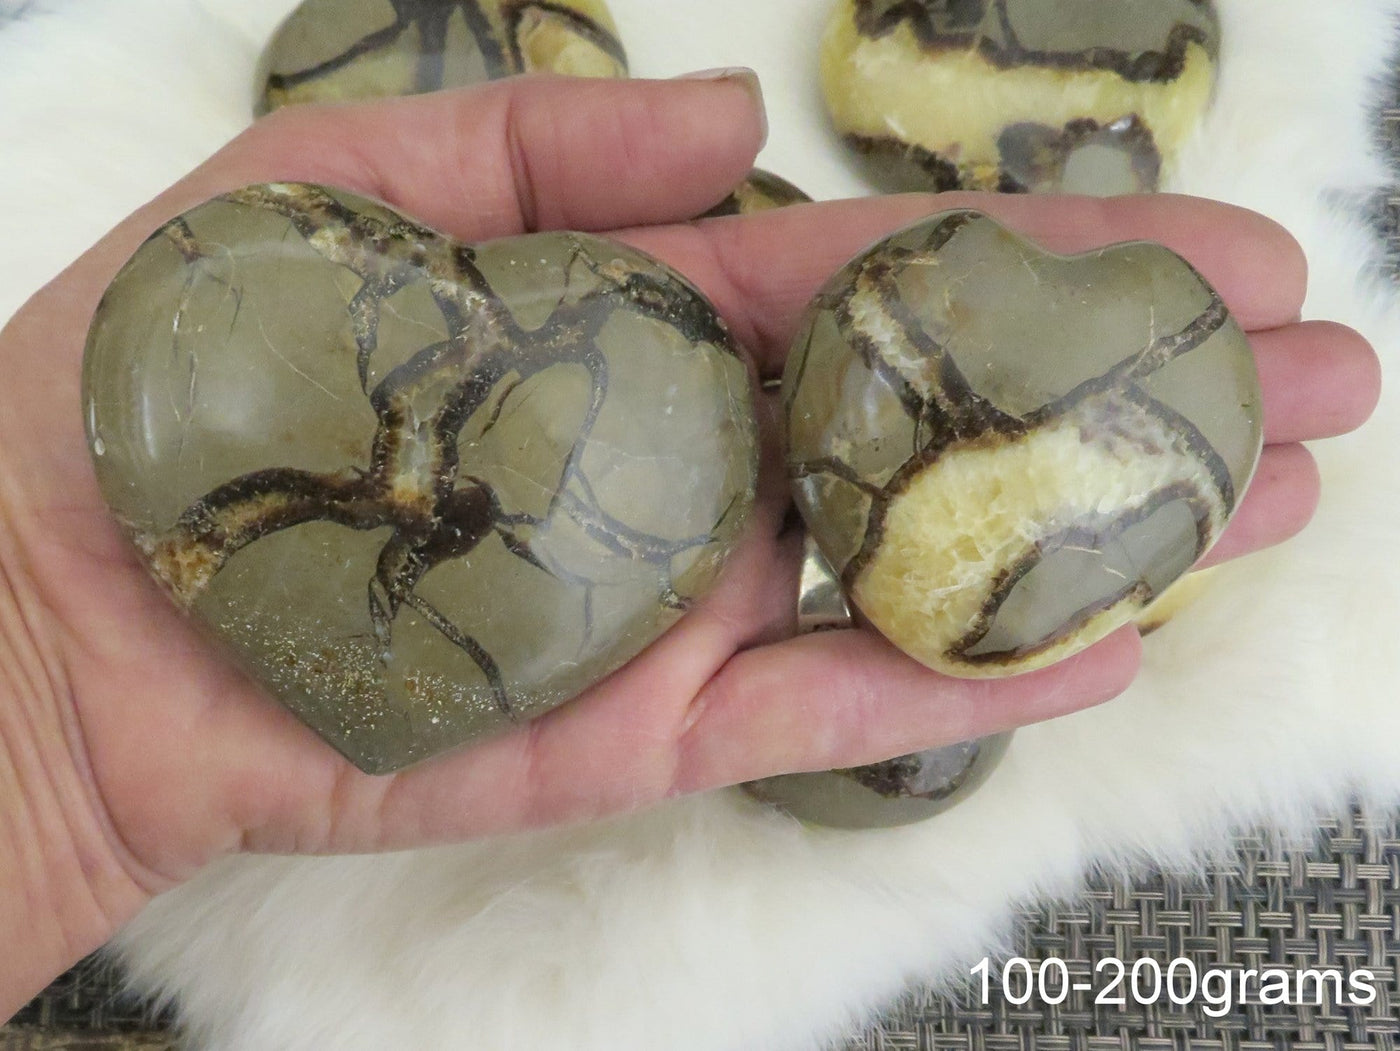 two 100-200g septarian polished heart stones in hand for approximate size reference